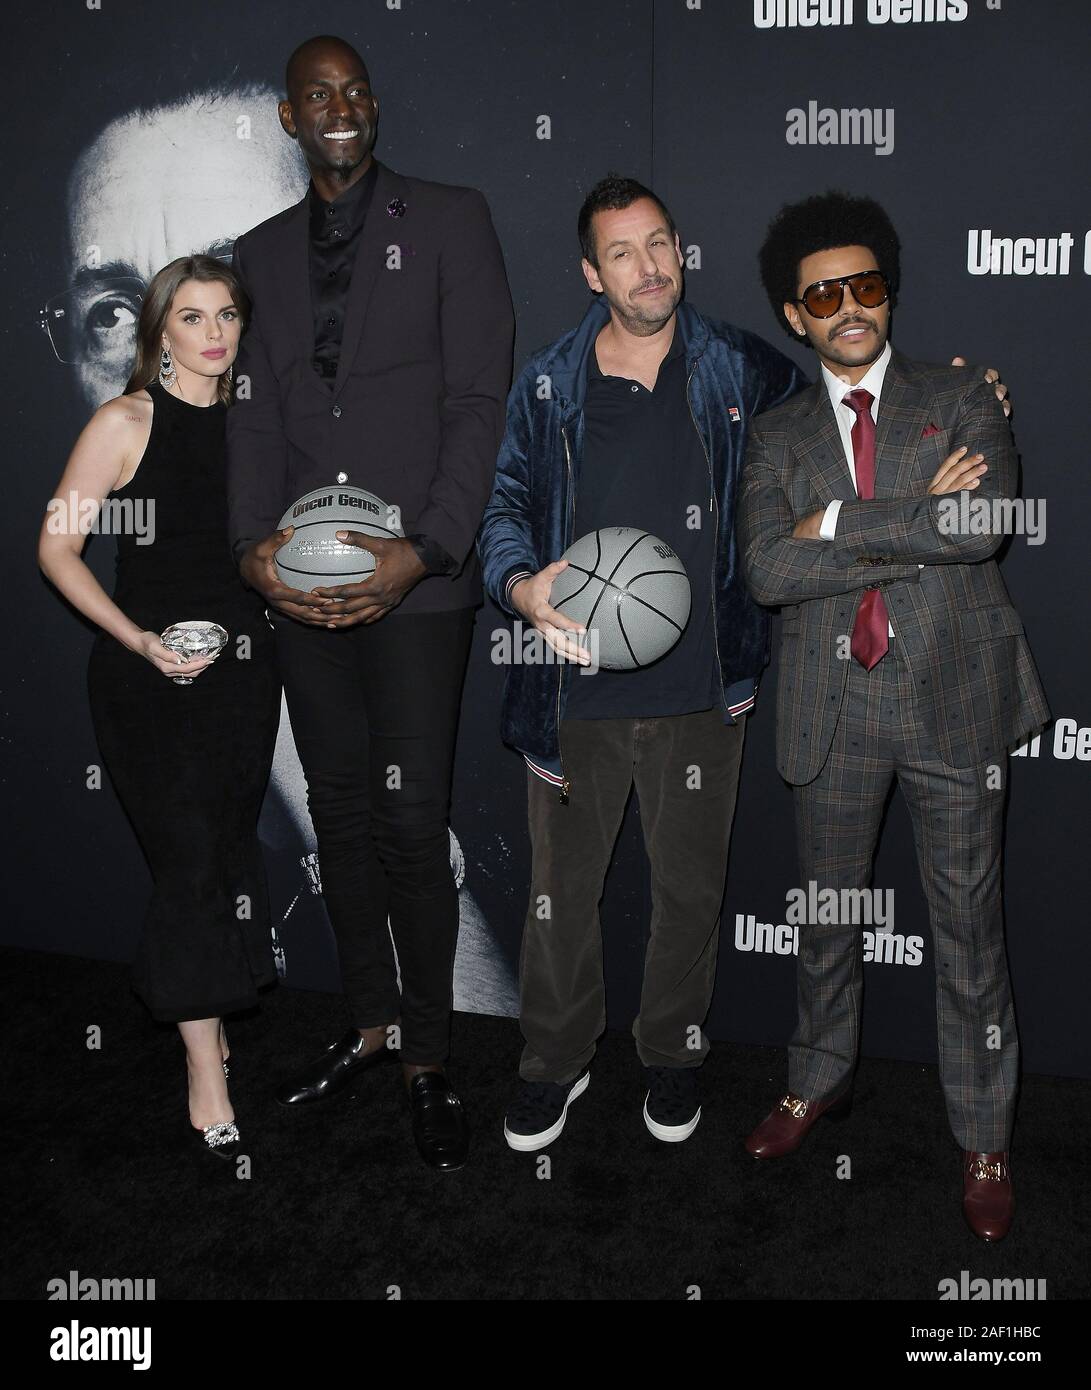 Los Angeles, USA. 11th Dec, 2019. (L-R) Julia Fox, Kevin Garnett, Adam Sandler and The Weeknd at the UNCUT GEMS Los Angeles Premiere held at the ArcLight Cinerama Dome in Los Angeles, CA on Wednesday, ?December 11, 2019. (Photo By Sthanlee B. Mirador/Sipa USA) Credit: Sipa USA/Alamy Live News Stock Photo